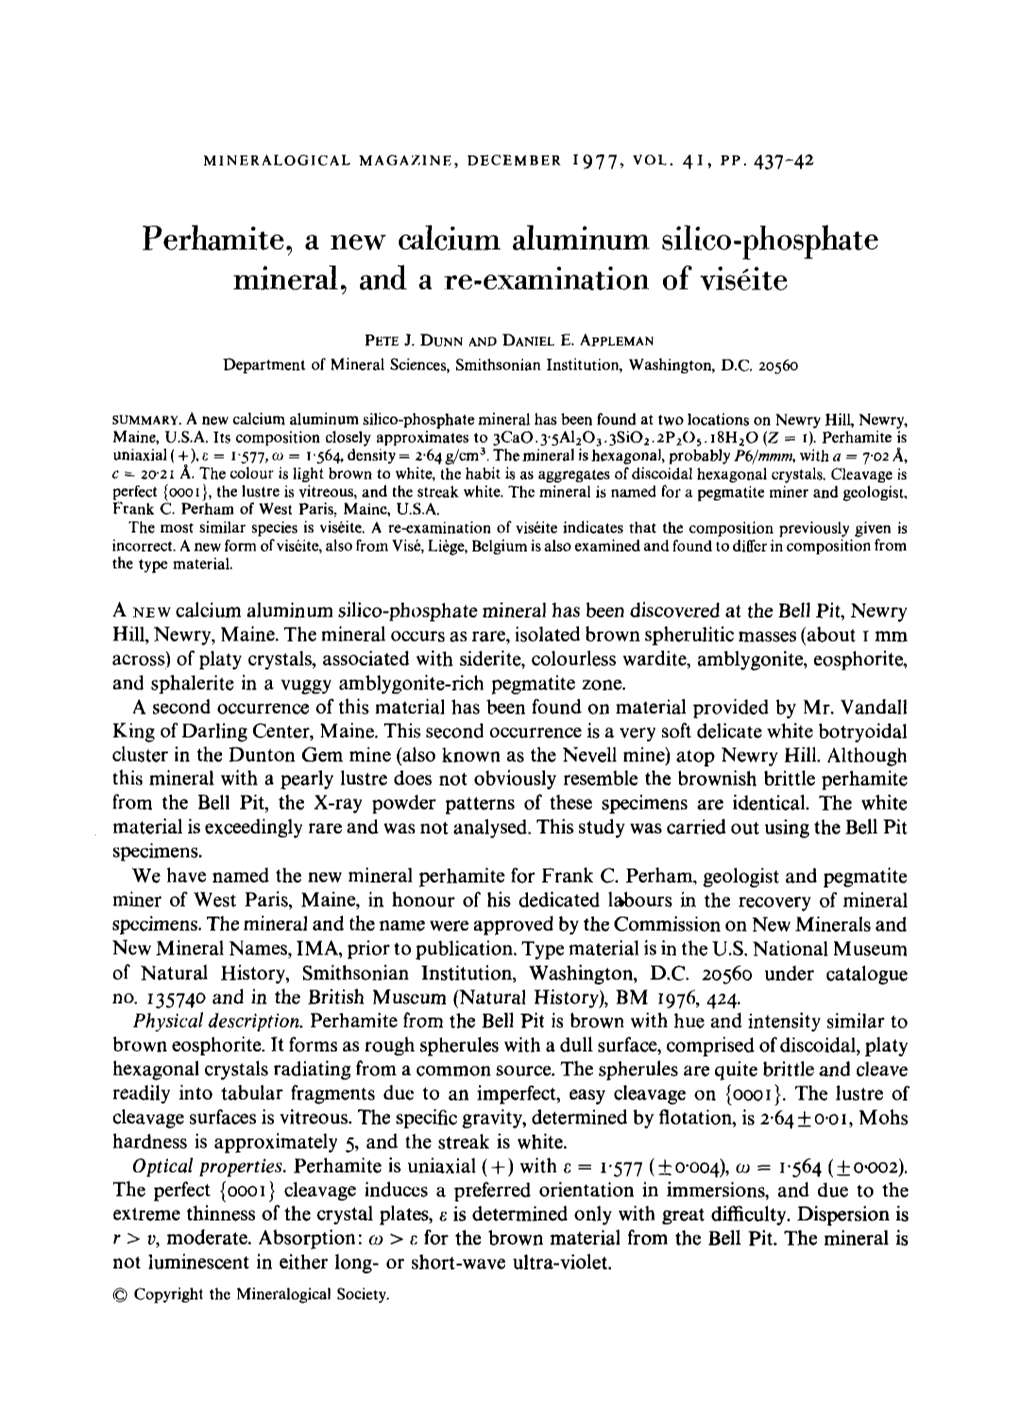 Perhamite, a New Calcium Aluminum Silico-Phosphate Mineral, and a Re-Exanfination of Vis6ite